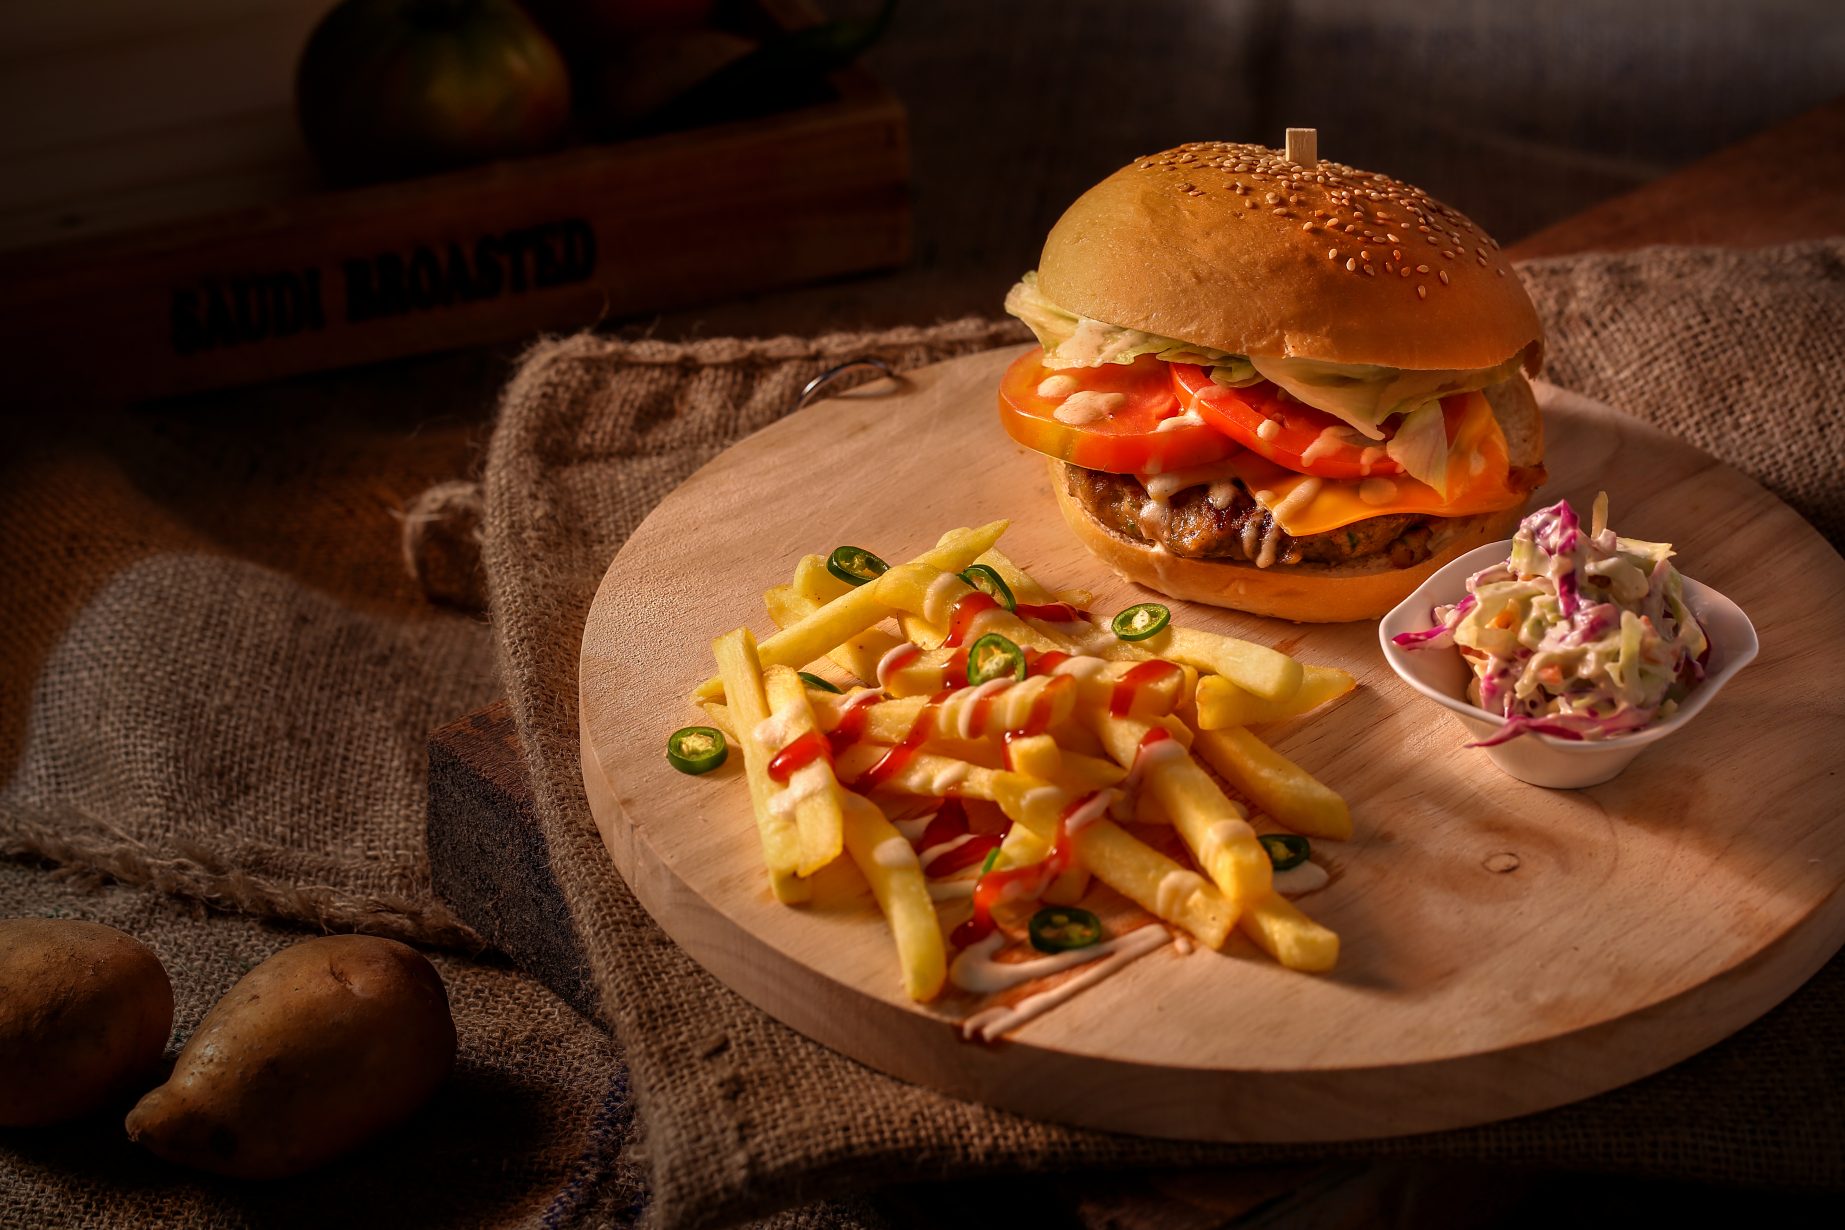 tomato-burger-and-fried-fries-1600727